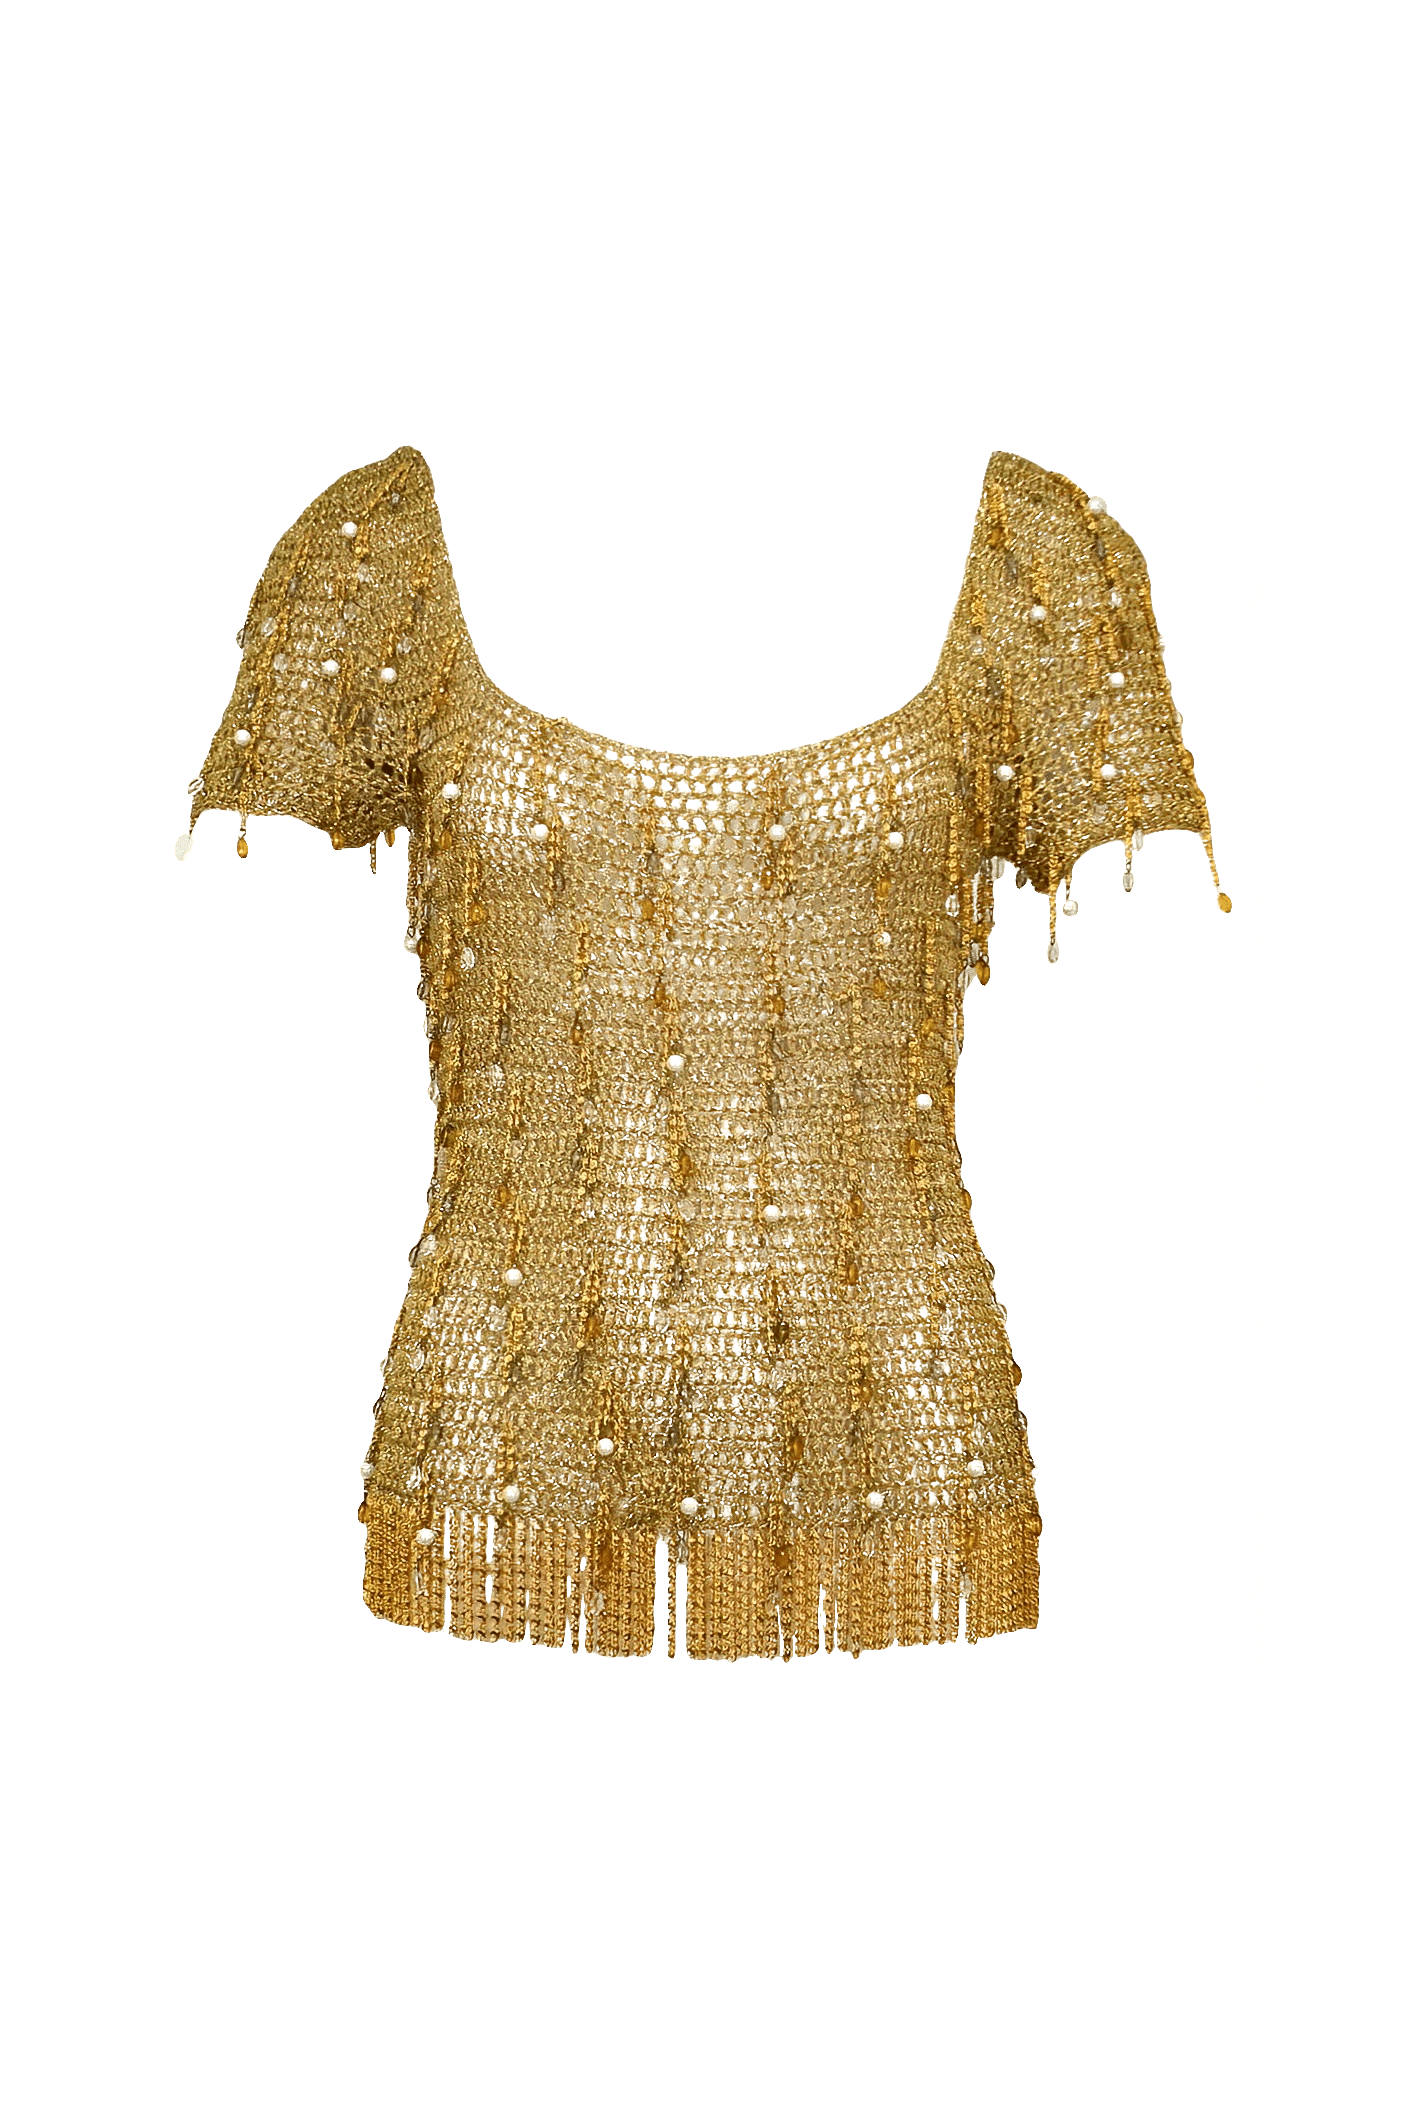 Lorris Azzaro Vintage 1970s Gold Crochet and Chain Top Sz Small - Foxy Couture Carmel